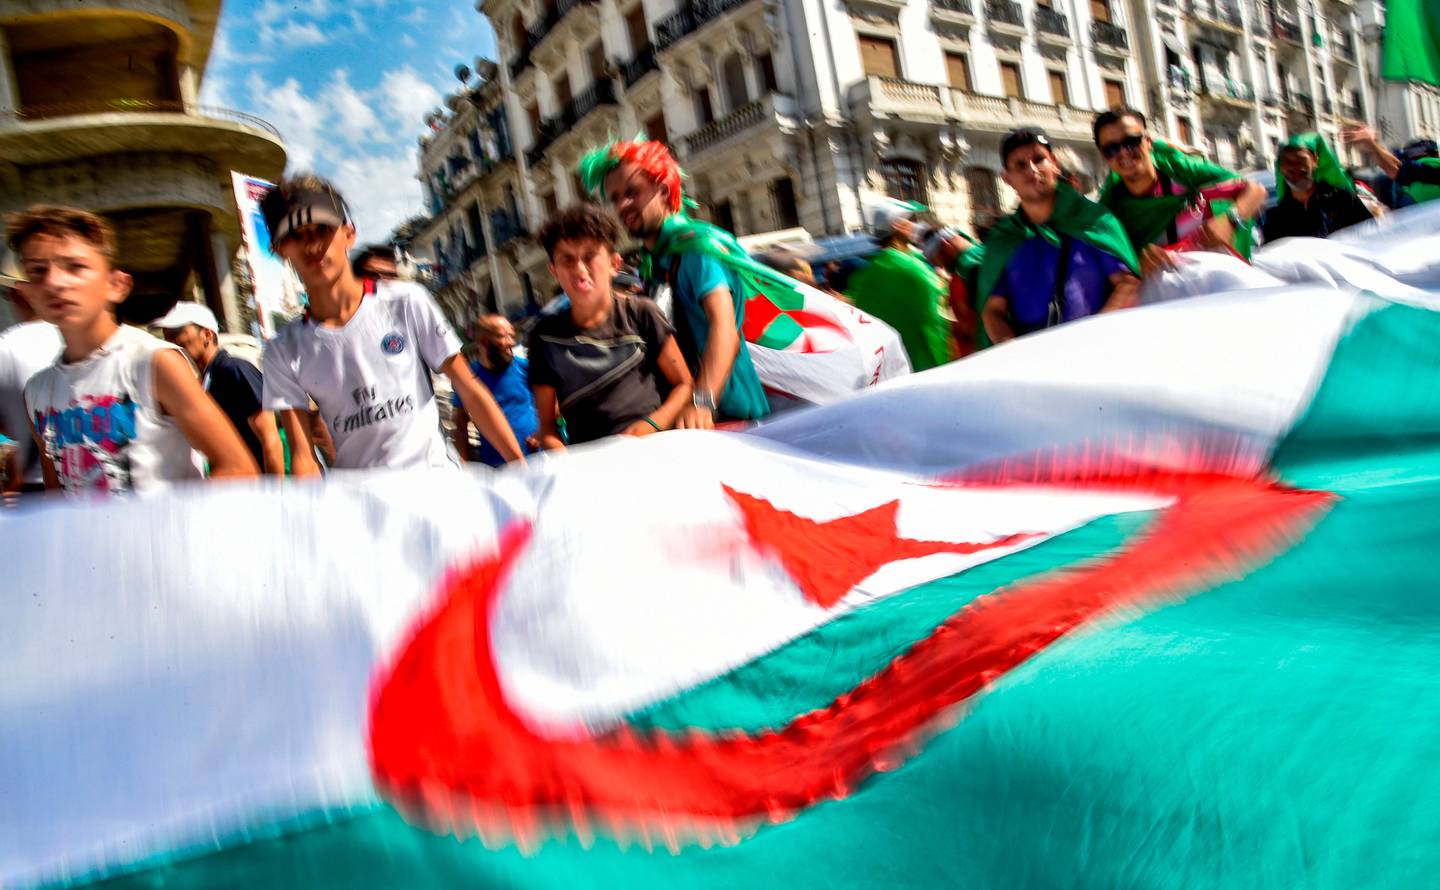 Algerian demonstrators wave a large national flag as they gather in the streets of the capital Algiers against the ruling class amid an ongoing political crisis in the country, on the 22nd consecutive Friday protest on July 19, 2019, coinciding with the Egypt 2019 Africa Cup of Nations final match between Algeria and Senegal. - In April, long-standing president Abdelaziz Bouteflika resigned after weekly Friday protests against his expected candidacy for elections, and football fans have been heavily involved in demonstrations. (Photo by RYAD KRAMDI / AFP)